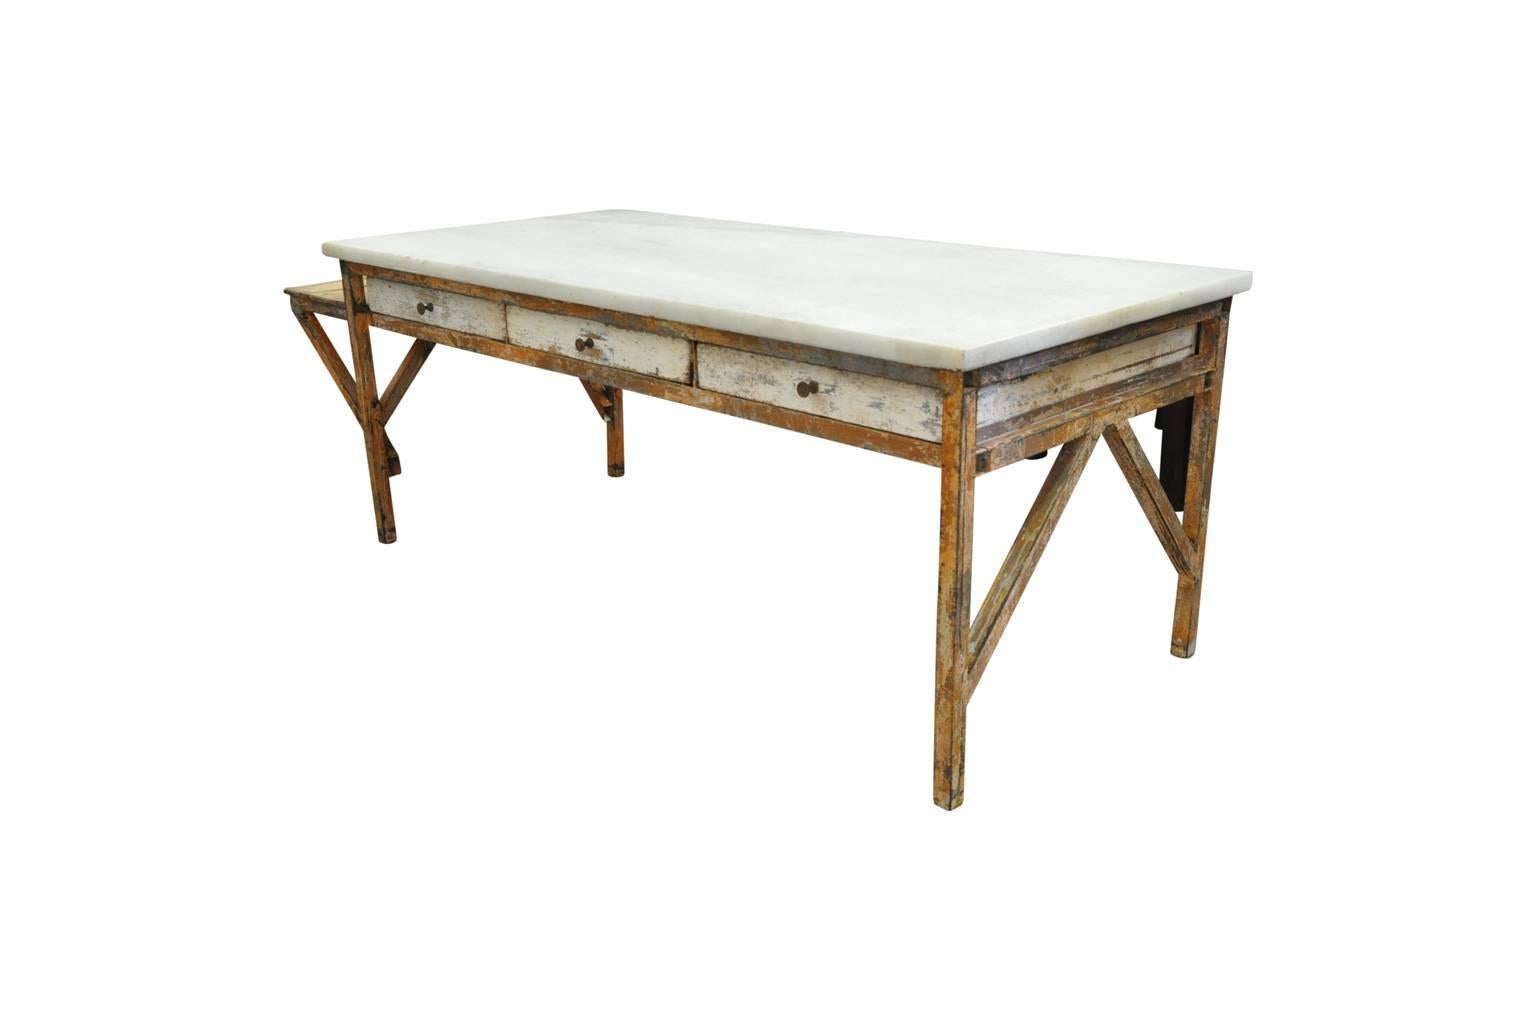 An outstanding and monumental early 20th century French pastry table - table Patisserie - beautifully constructed from marble and iron. A tremendous kitchen island, potting table, bar table or work table.